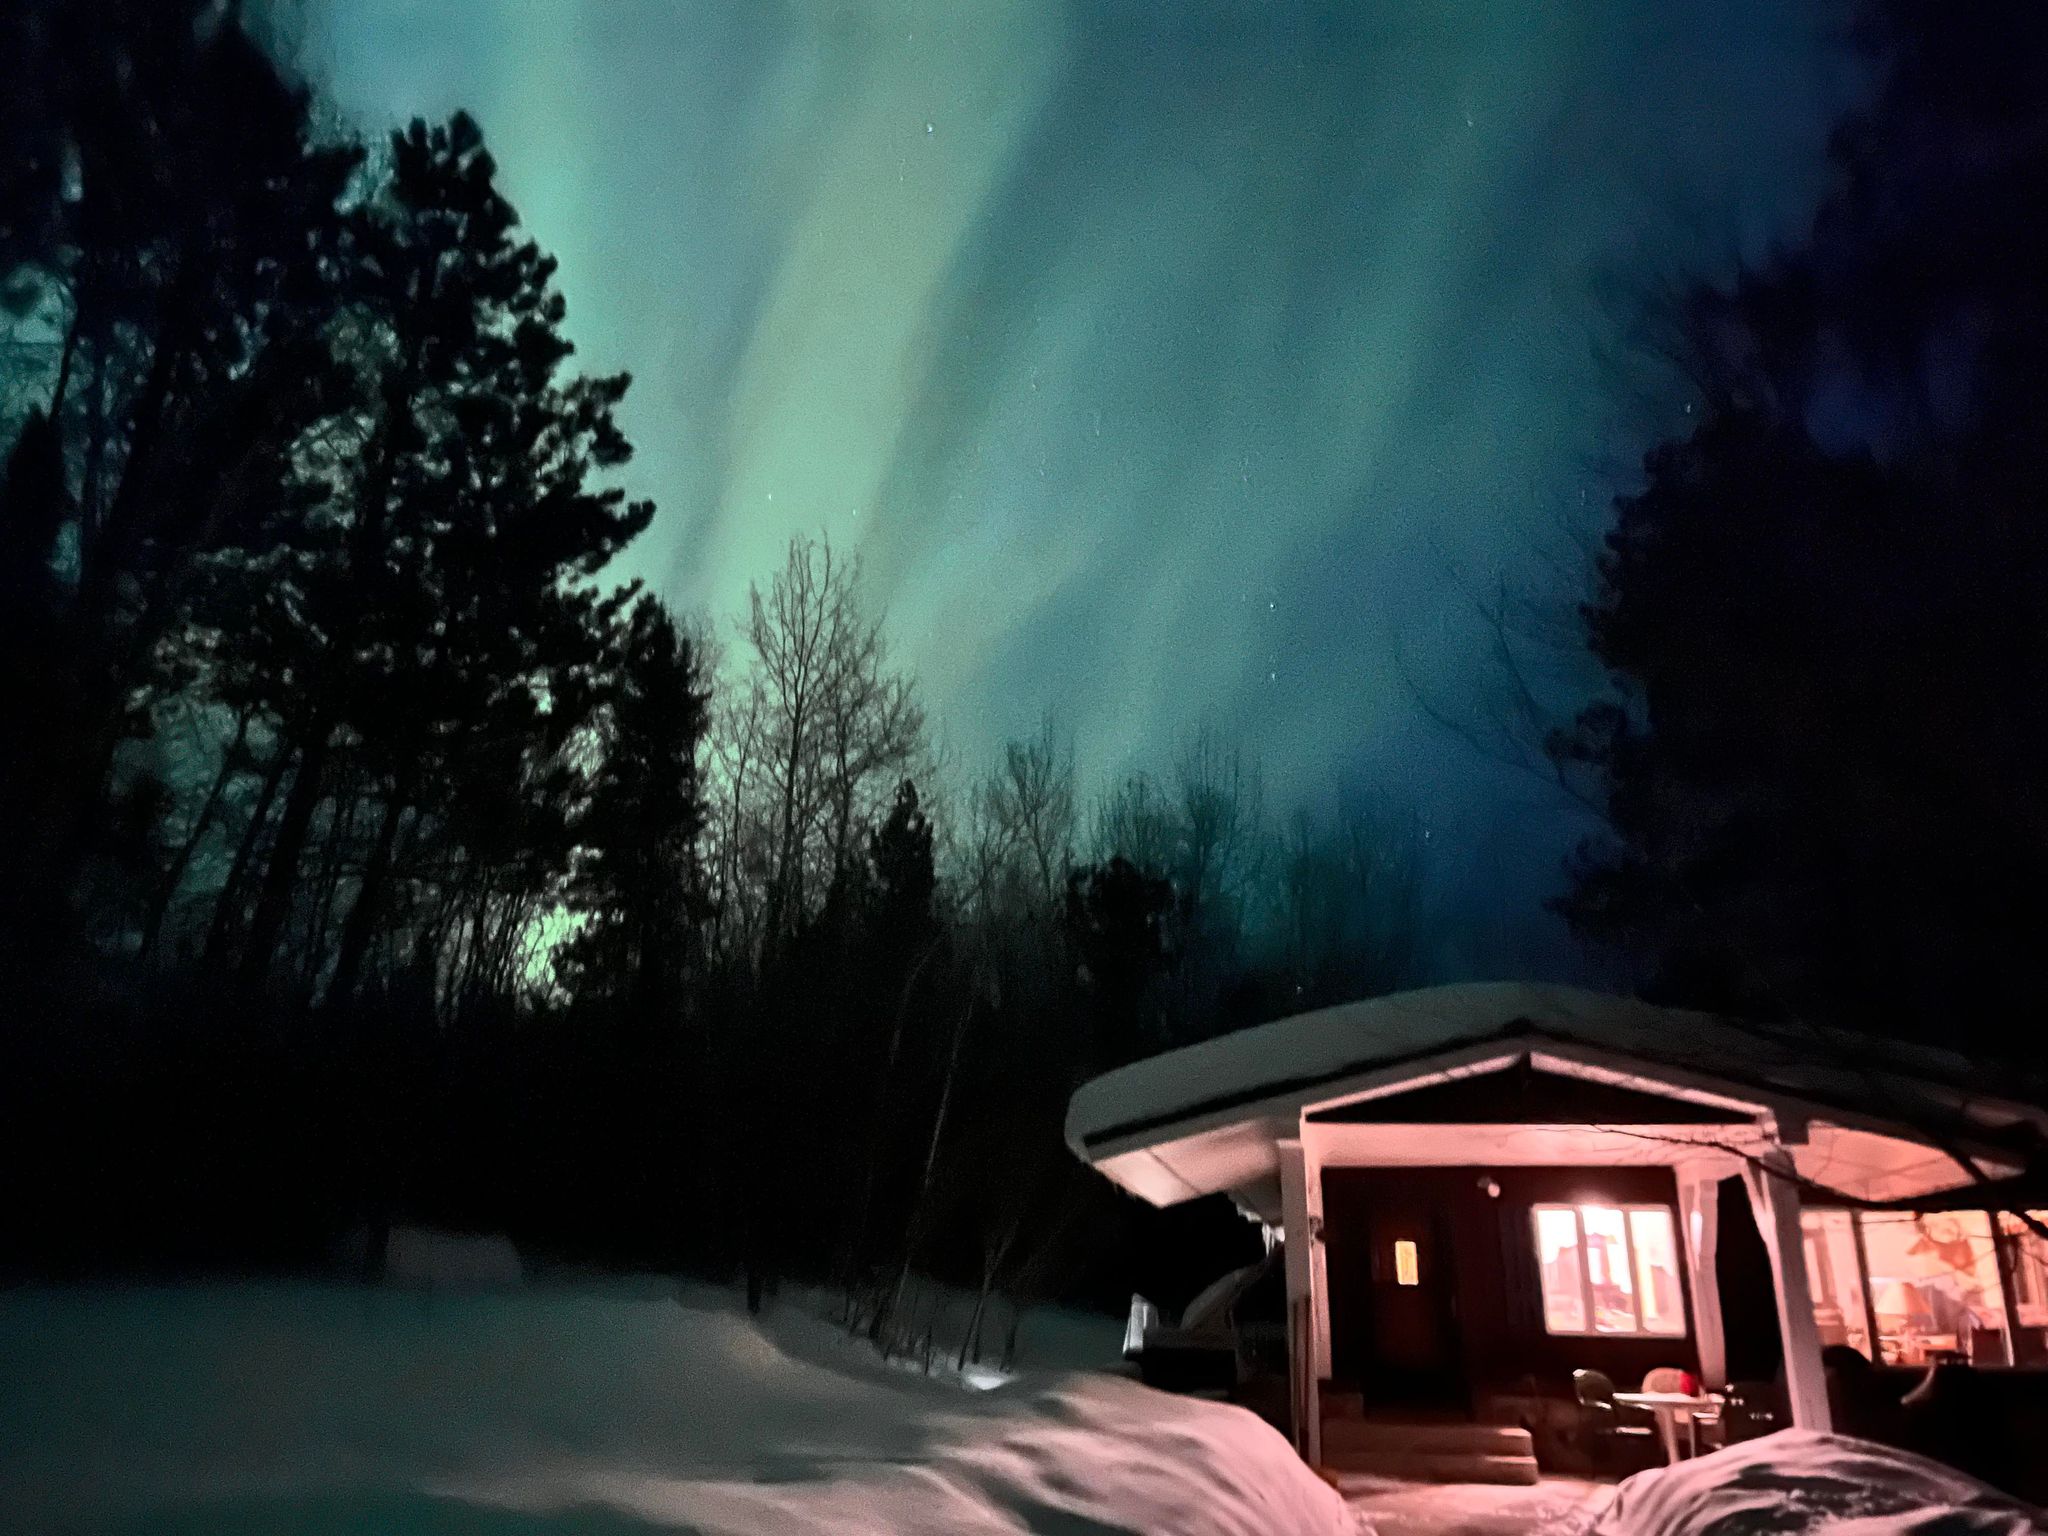 A lighted house with a porch, covered in snow with the Northern Lights streaking blue and green.